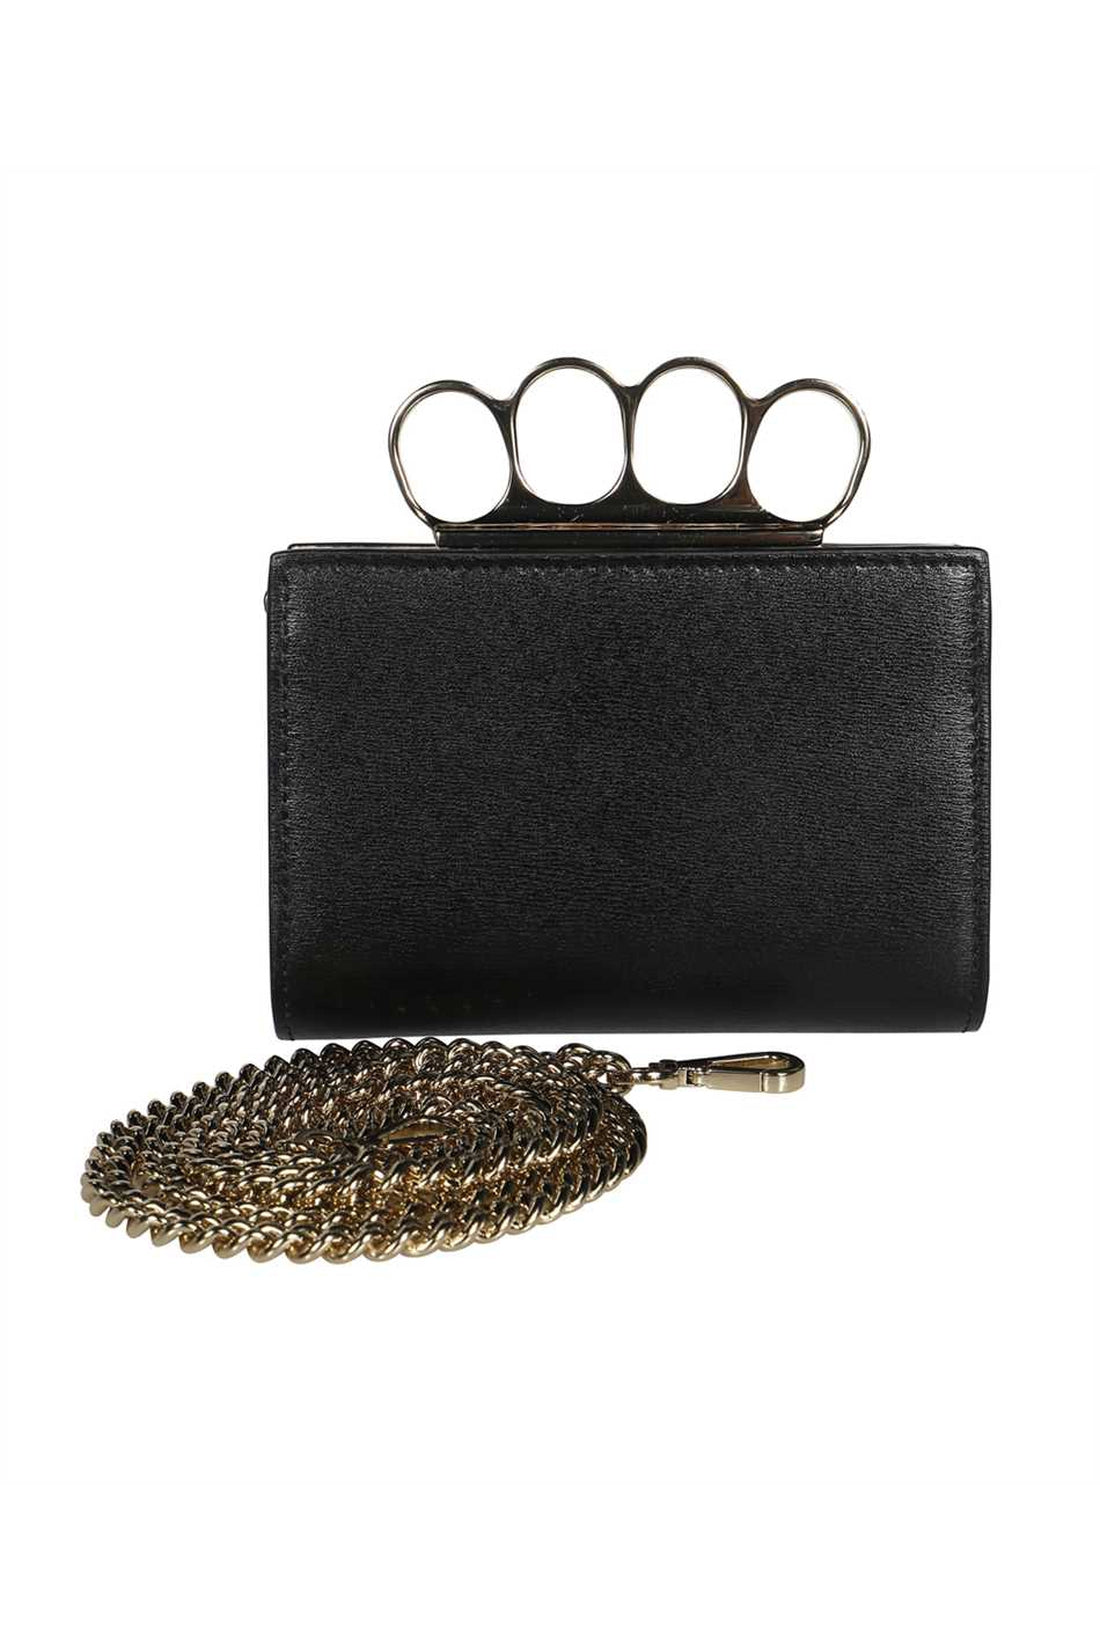 Alexander McQueen-OUTLET-SALE-Leather wallet on chain-ARCHIVIST